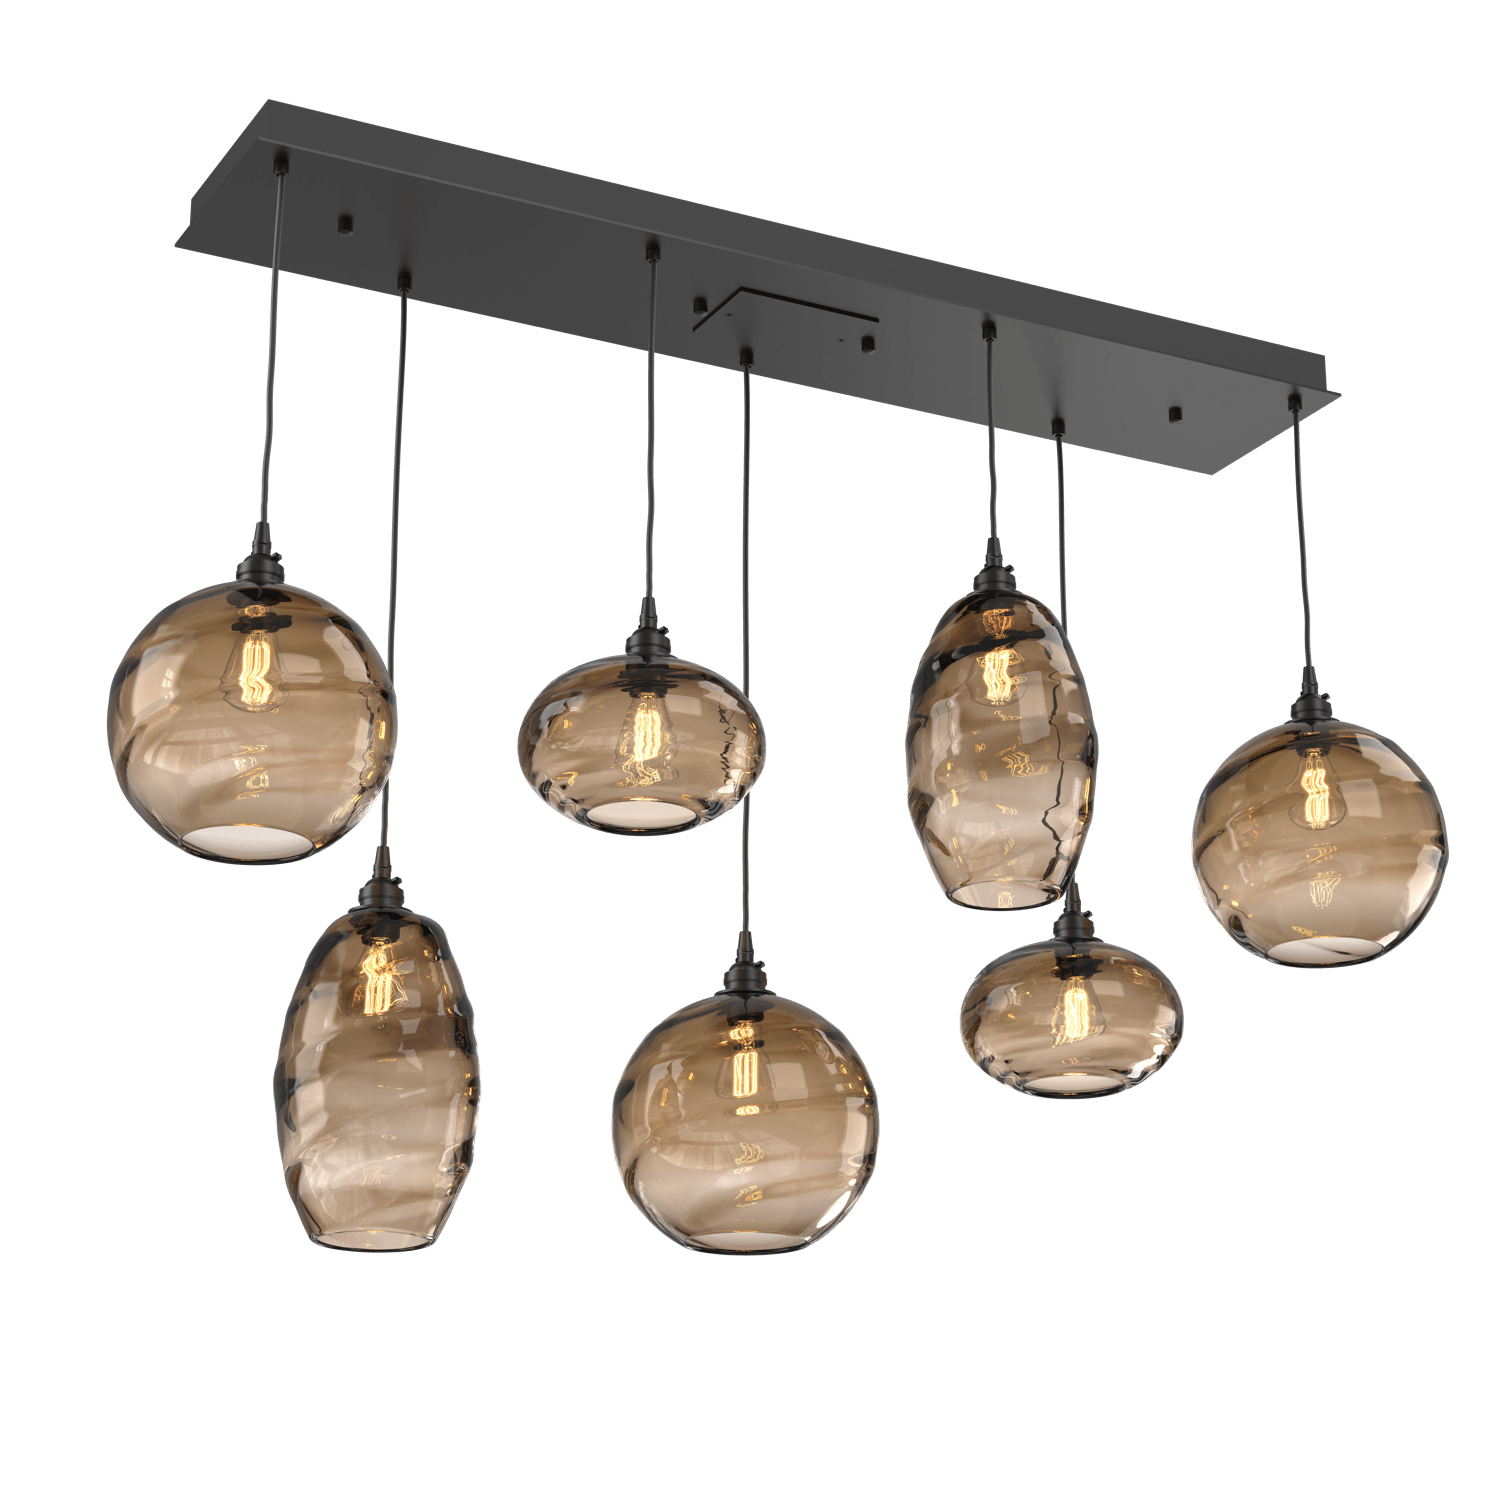 PLB0048-07-MB-OB-Hammerton-Studio-Optic-Blown-Glass-Misto-7-light-linear-pendant-chandelier-with-matte-black-finish-and-optic-bronze-blown-glass-shades-and-incandescent-lamping